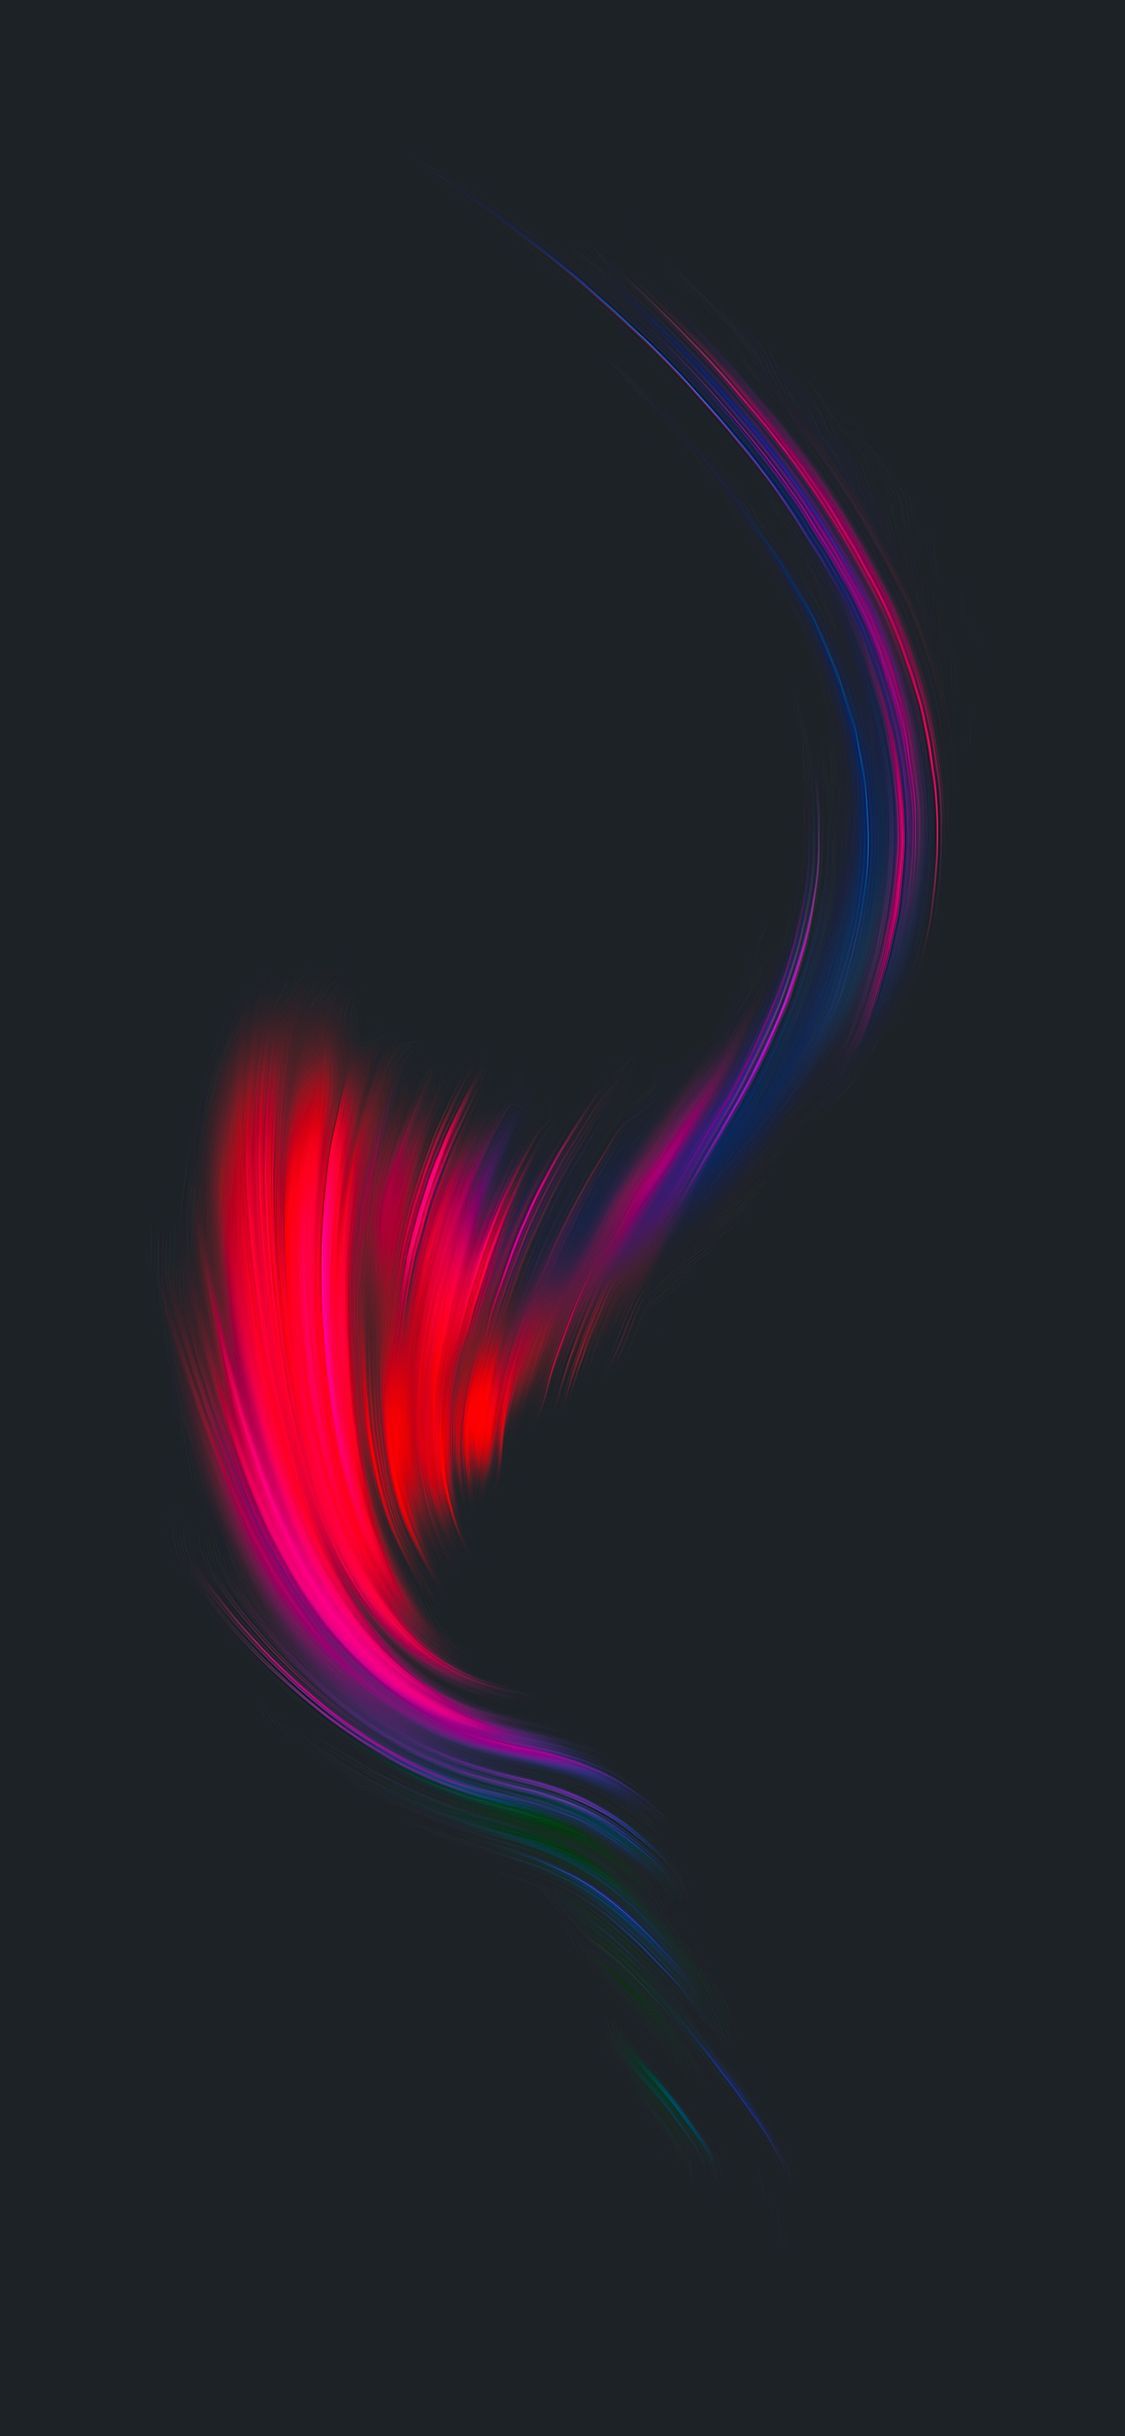 Created by AR72017. Follow him on Twitter for more amazing